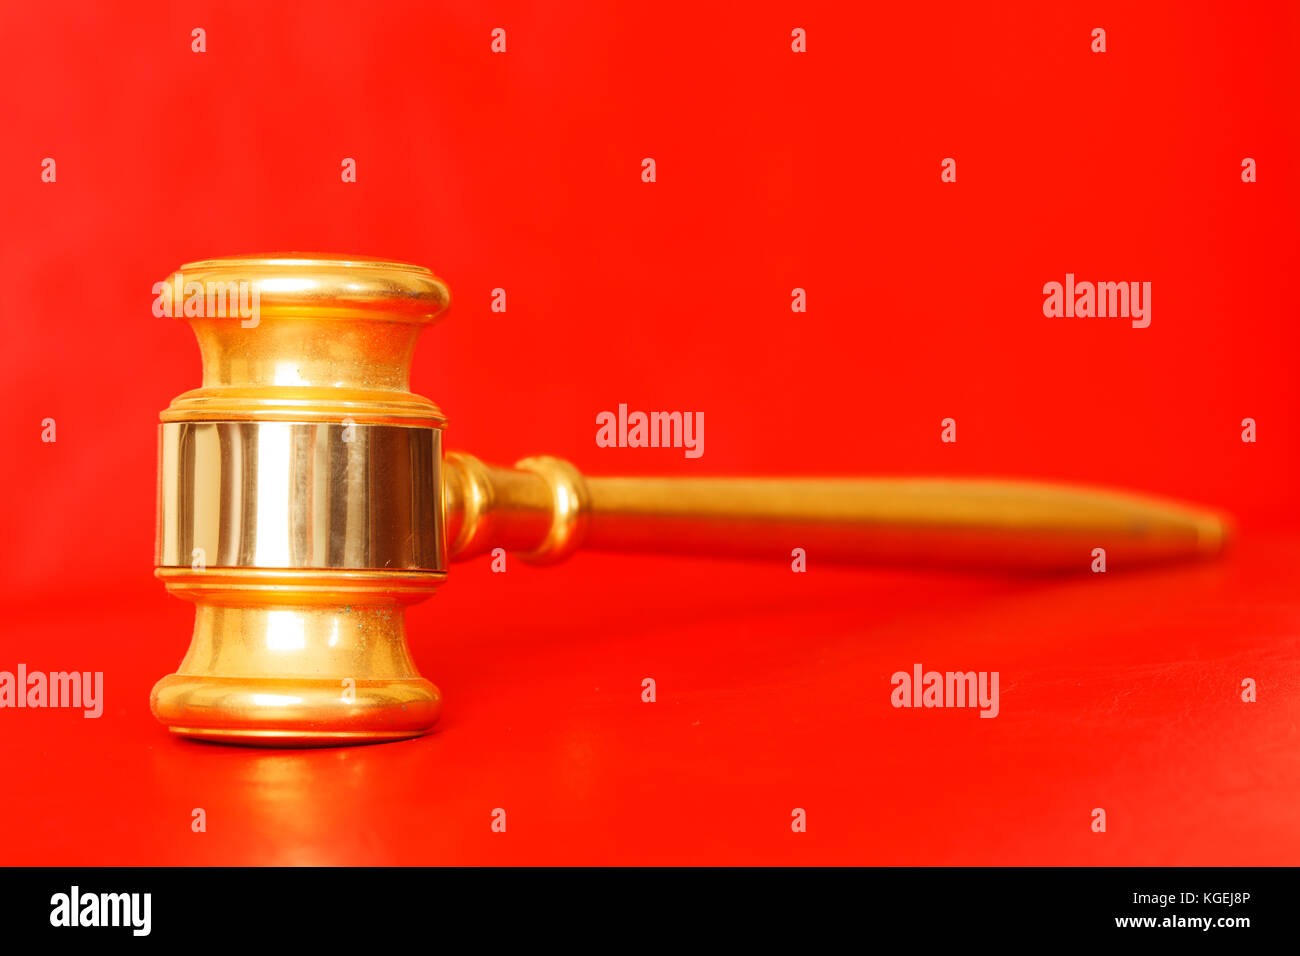 Juridical concept with Gavel, selective focus on metal part Stock Photo